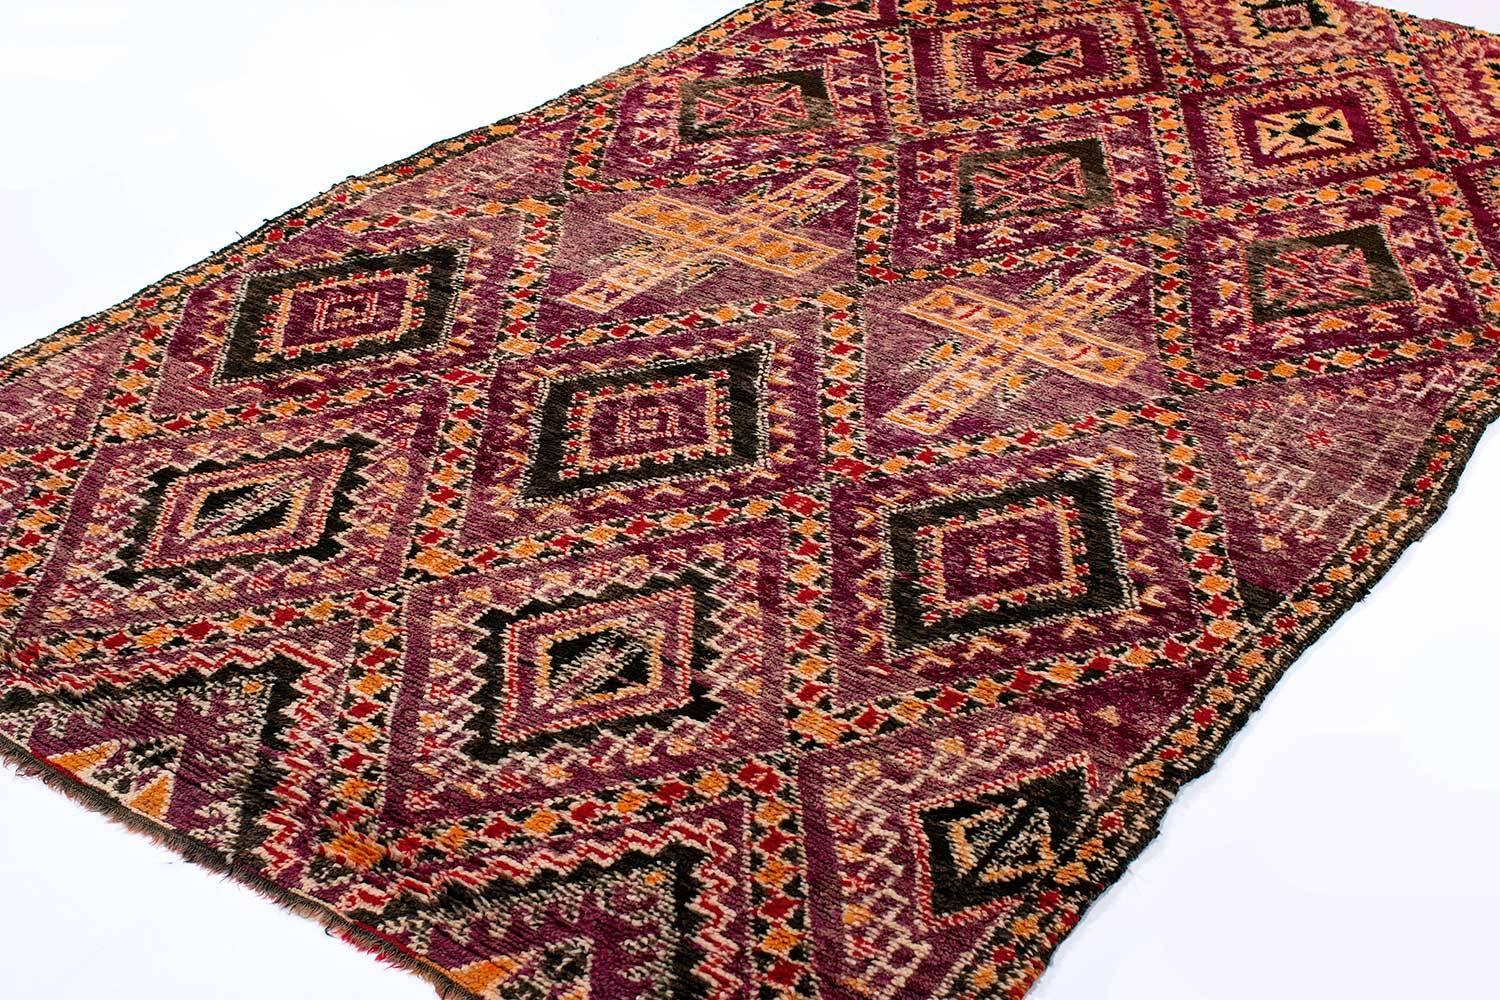 Vintage Moroccan Berber rug with beautiful motives and geometric elements and a great mauve/magenta color with deep indigo details and orange accents. This carpet was woven 50-60 years ago using silky hand-spun wool, from the Rif Mountains. The rug